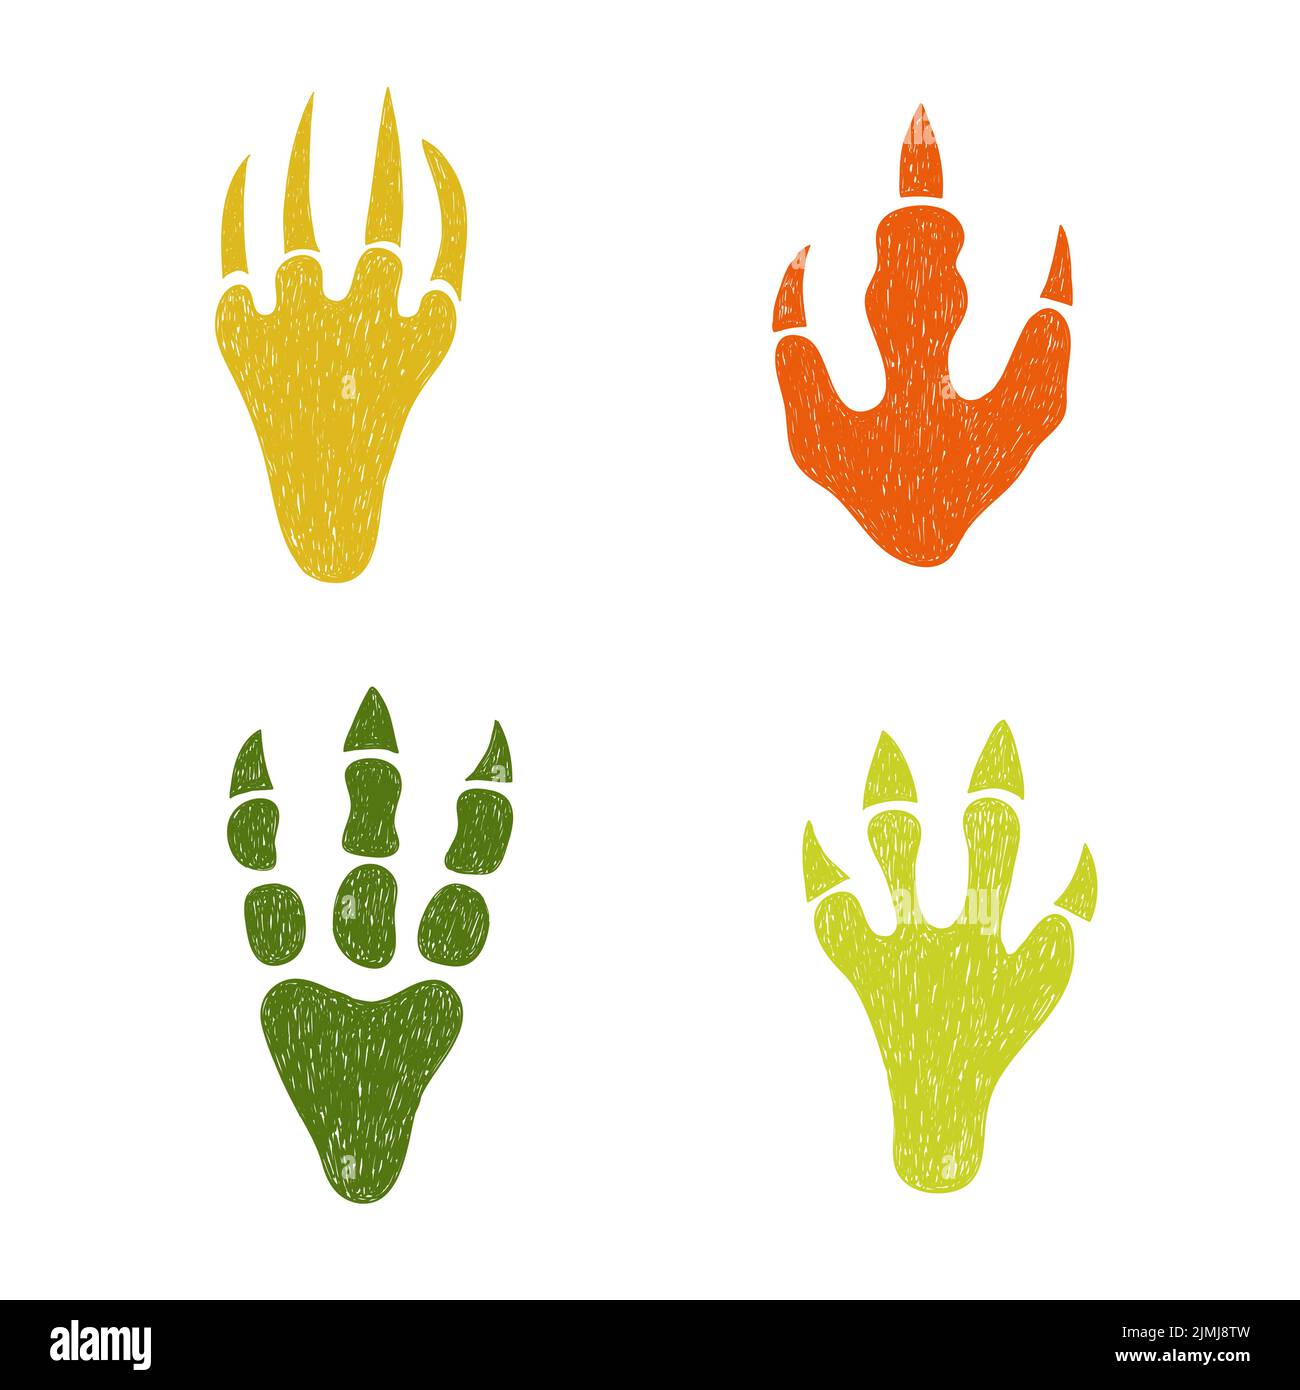 Dinosaur footprint set. Doodle colorful vector illustration of dinosaur paws with claws. Stock Vector